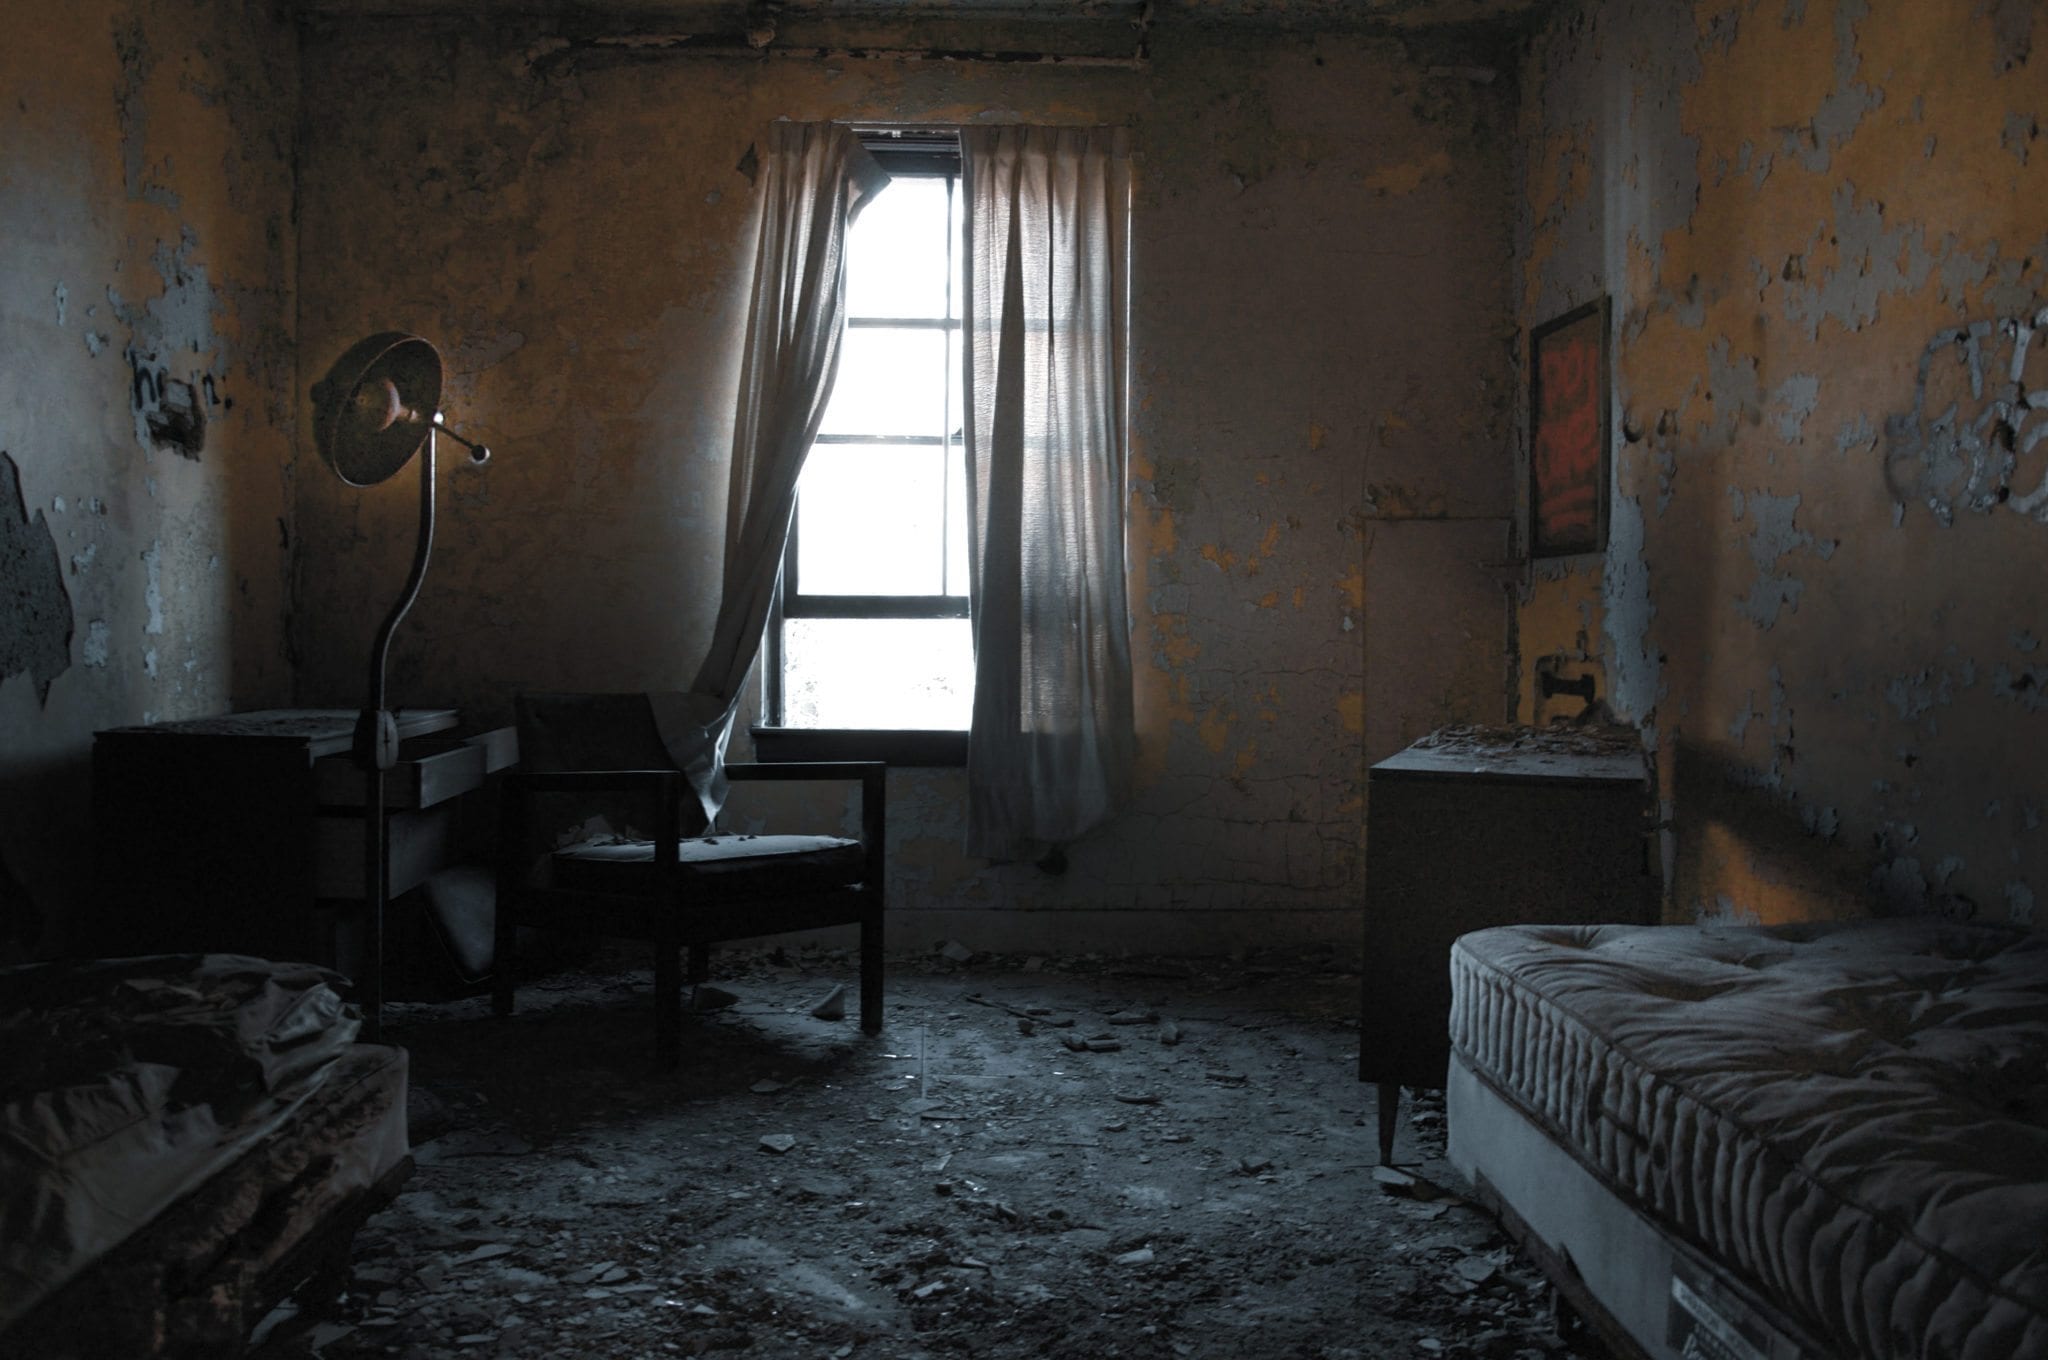 Images of haunted places